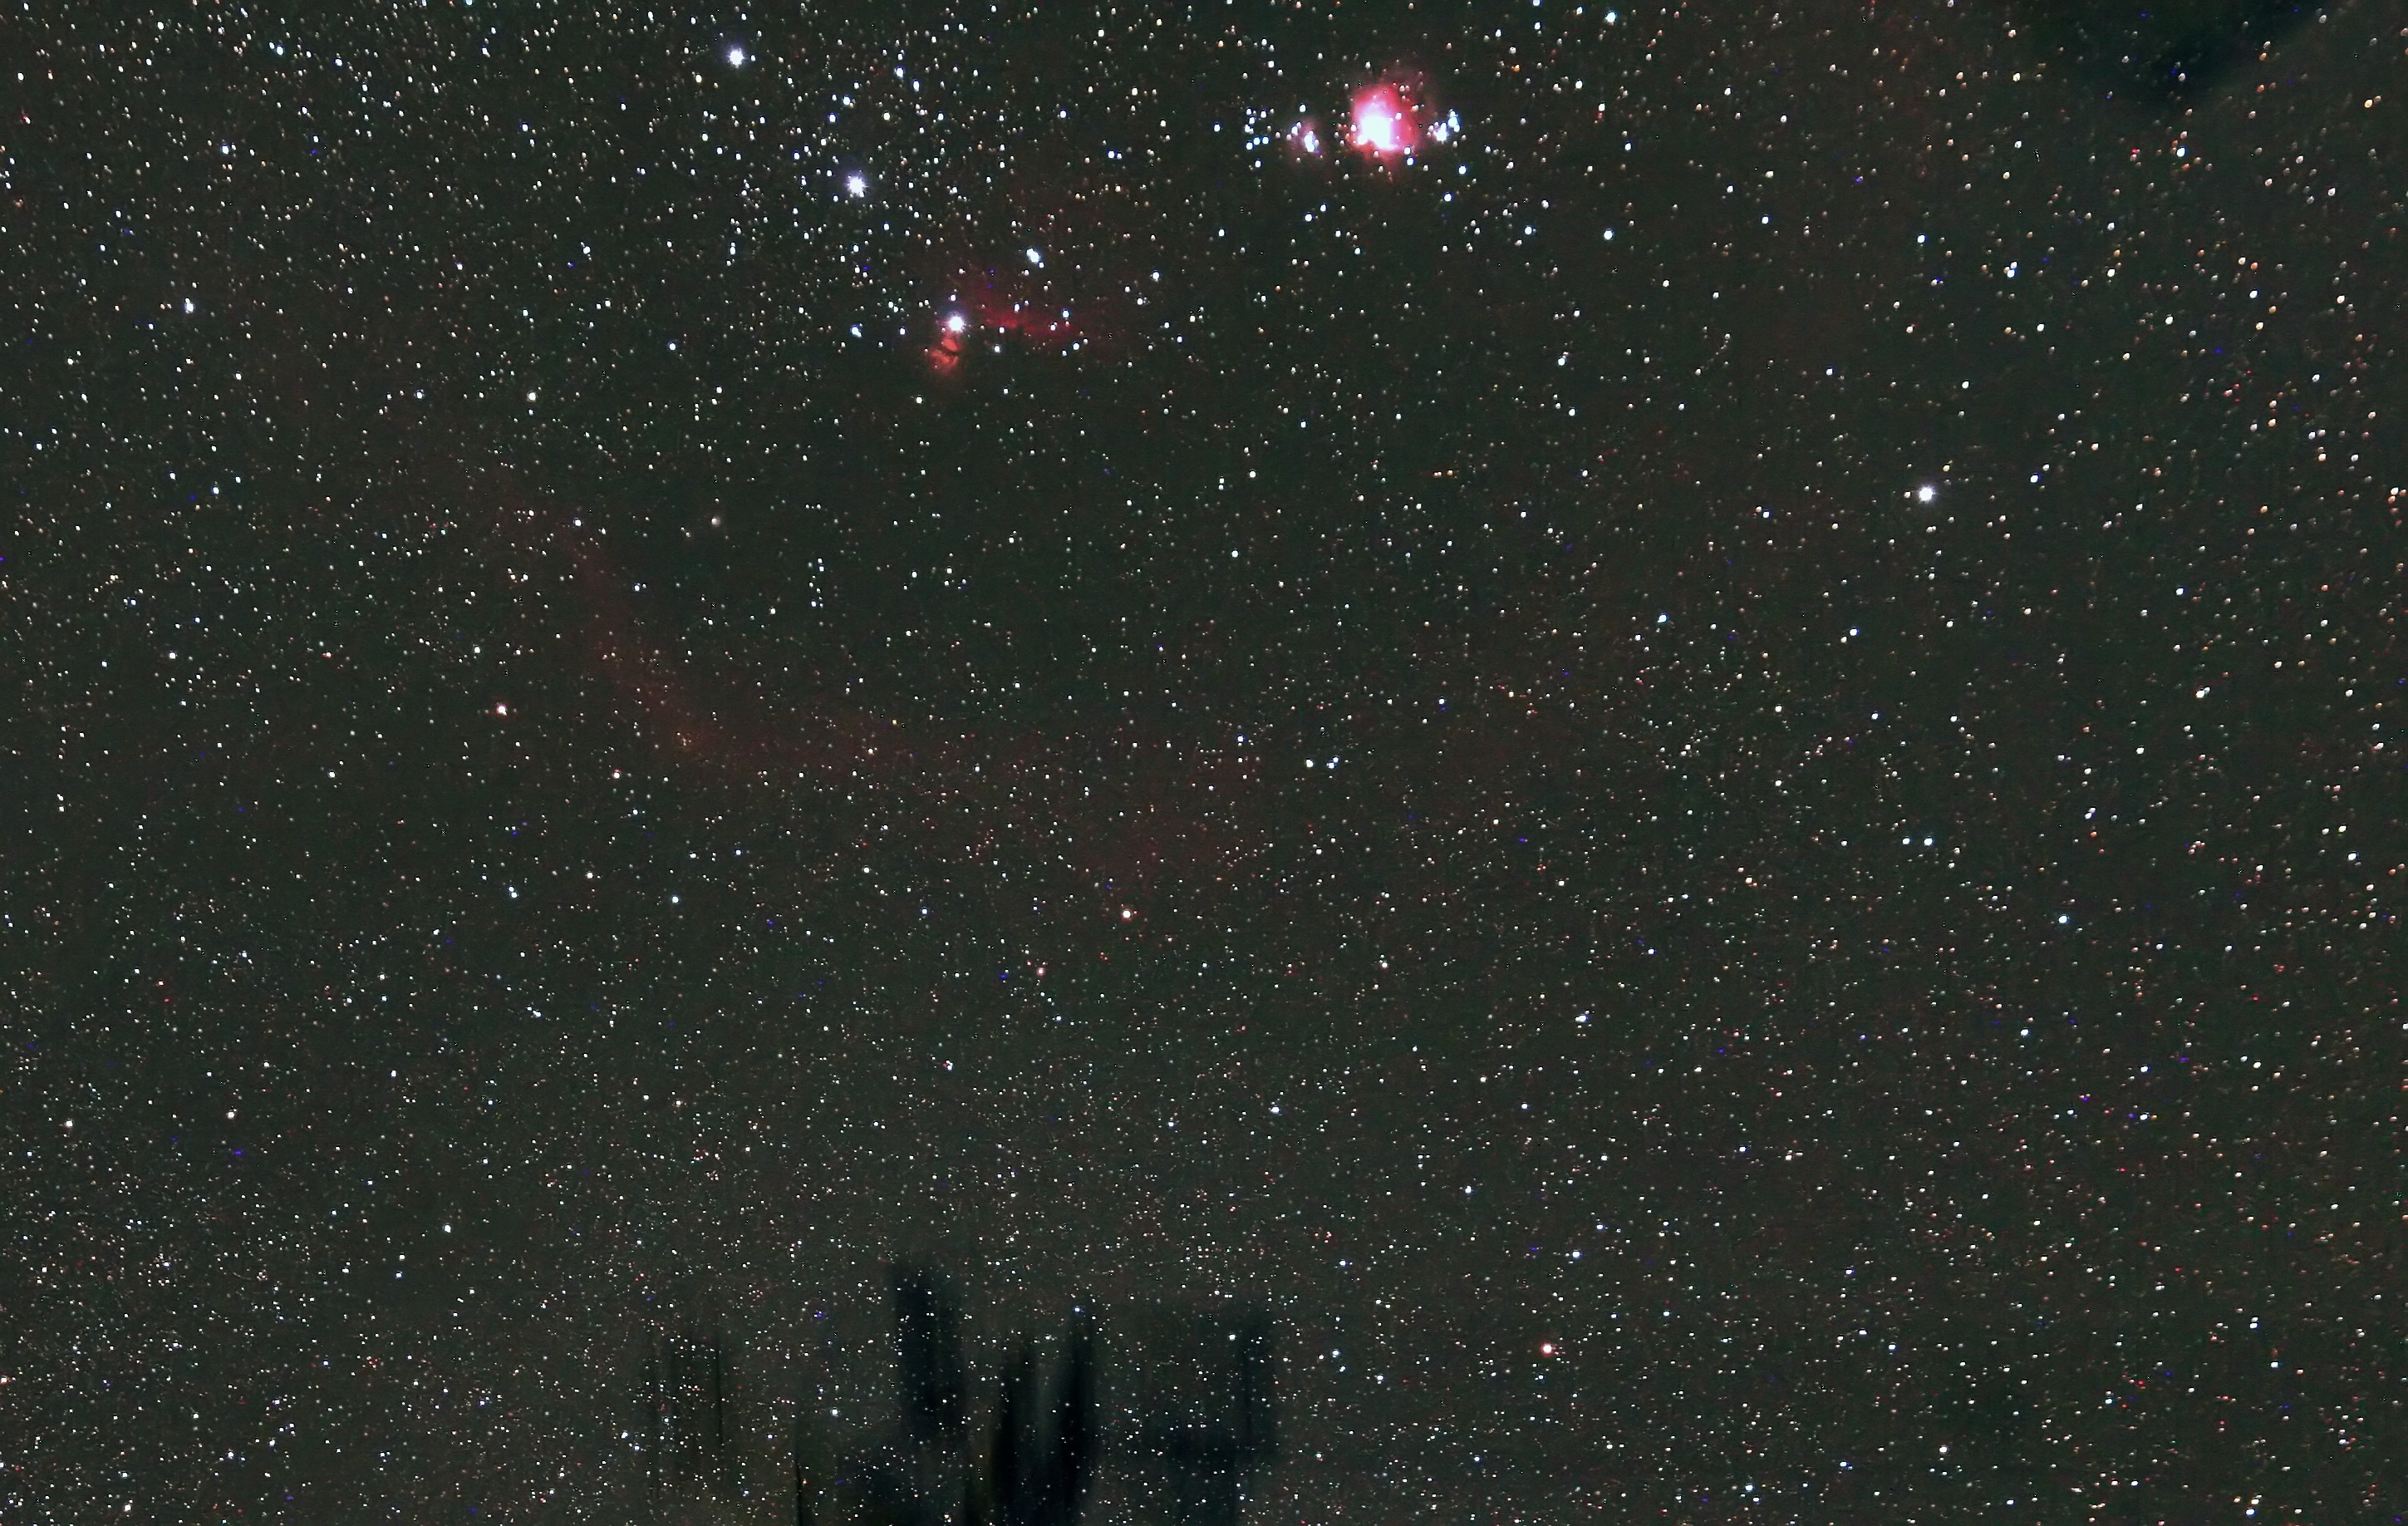 Orion_110925_PS1_4438-001cgs_filtered.jpg